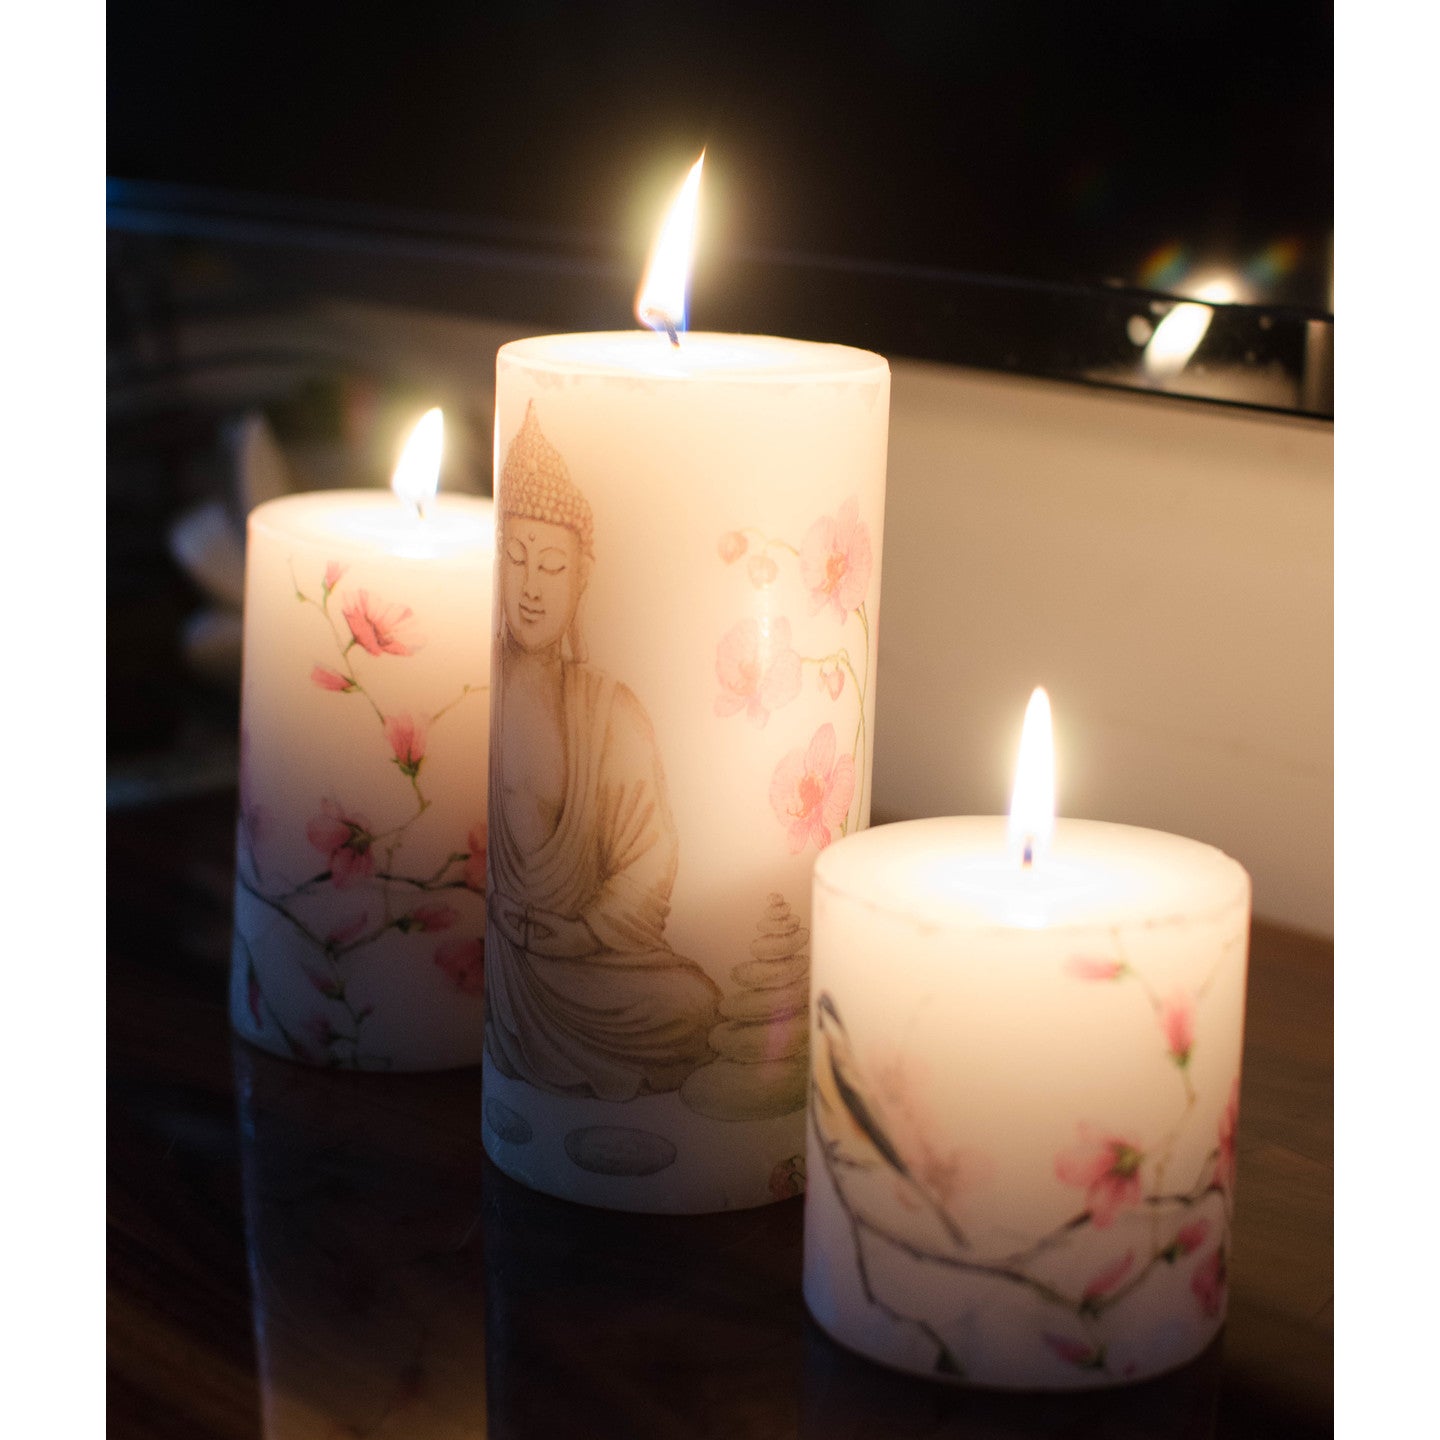 Set of 3 Buddha Image Printed Pillar Candles in a Gift Set - auradecor.co.in